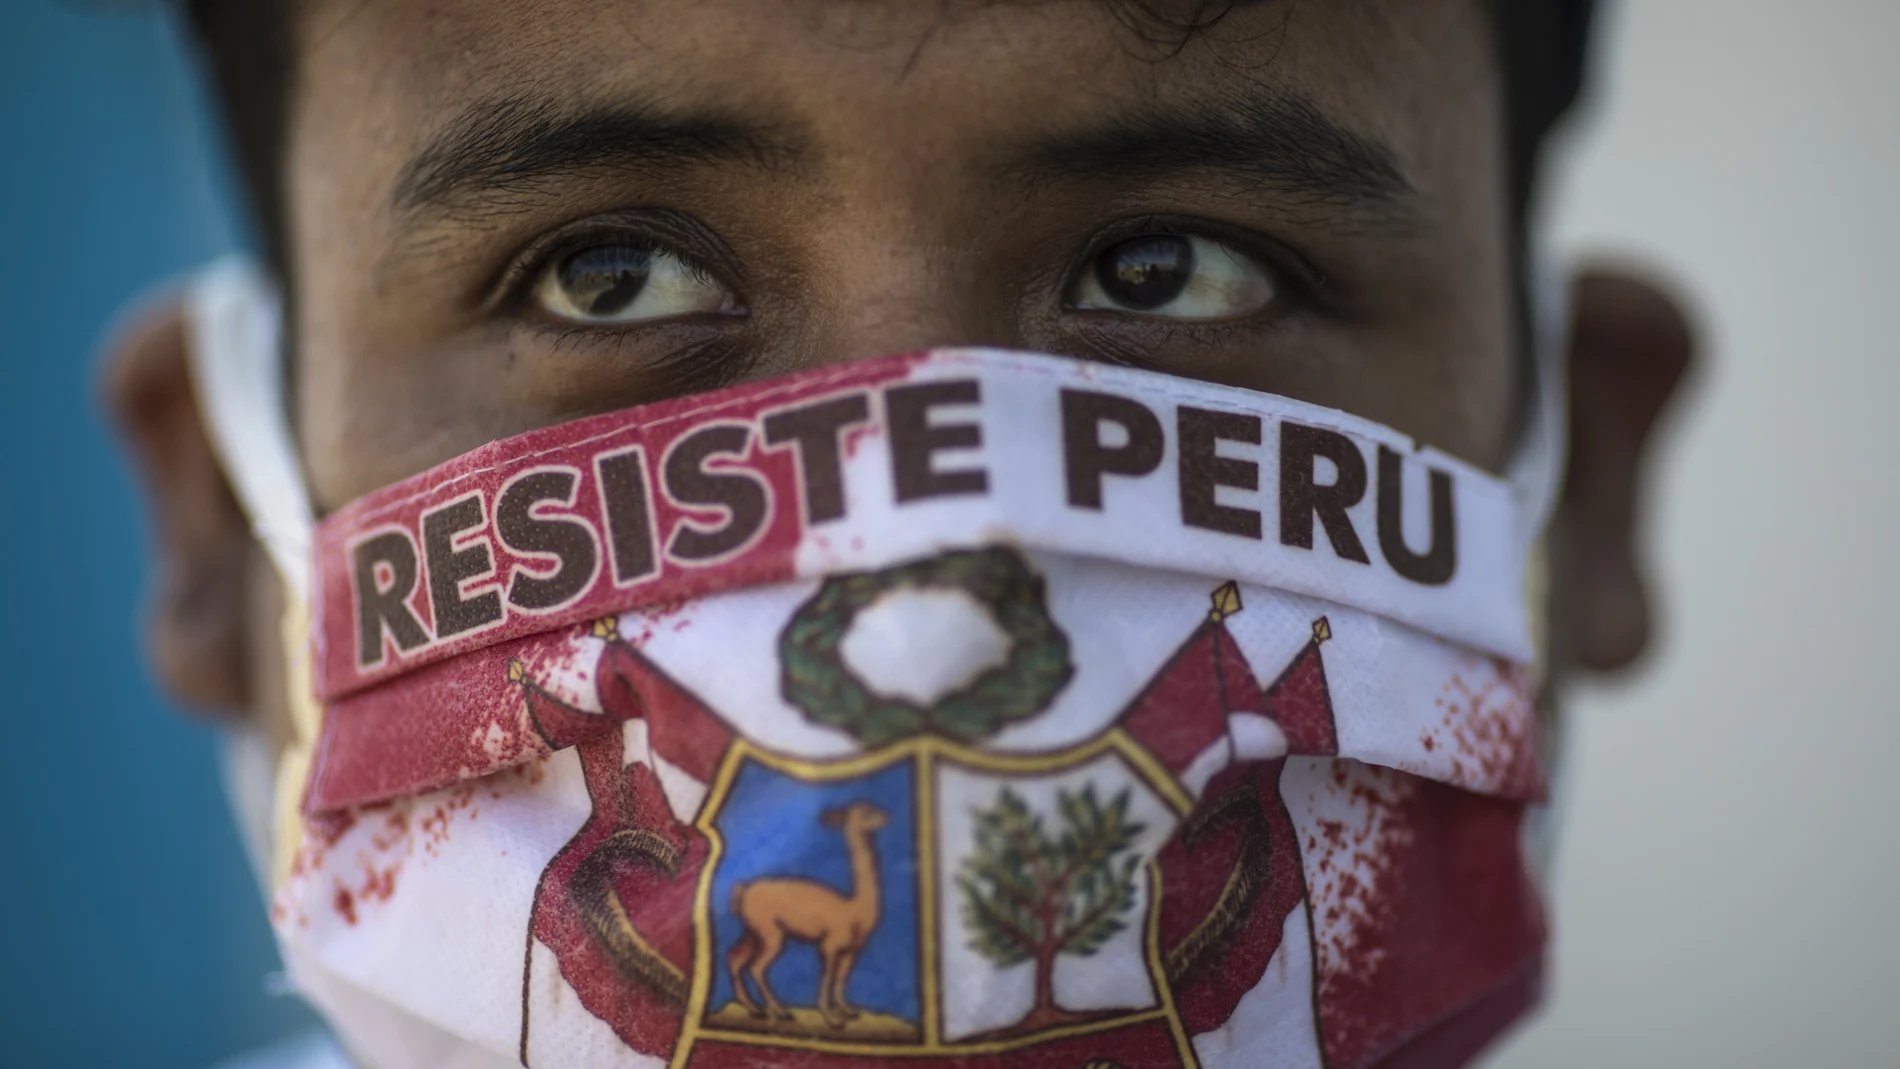 John Sanches wears a face mask with the Spanish message "Resist Peru" as he waits in line to be tested for COVID-19 at Almenara Hospital in Lima, Peru, Friday, April 24, 2020. (AP Photo/Rodrigo Abd)